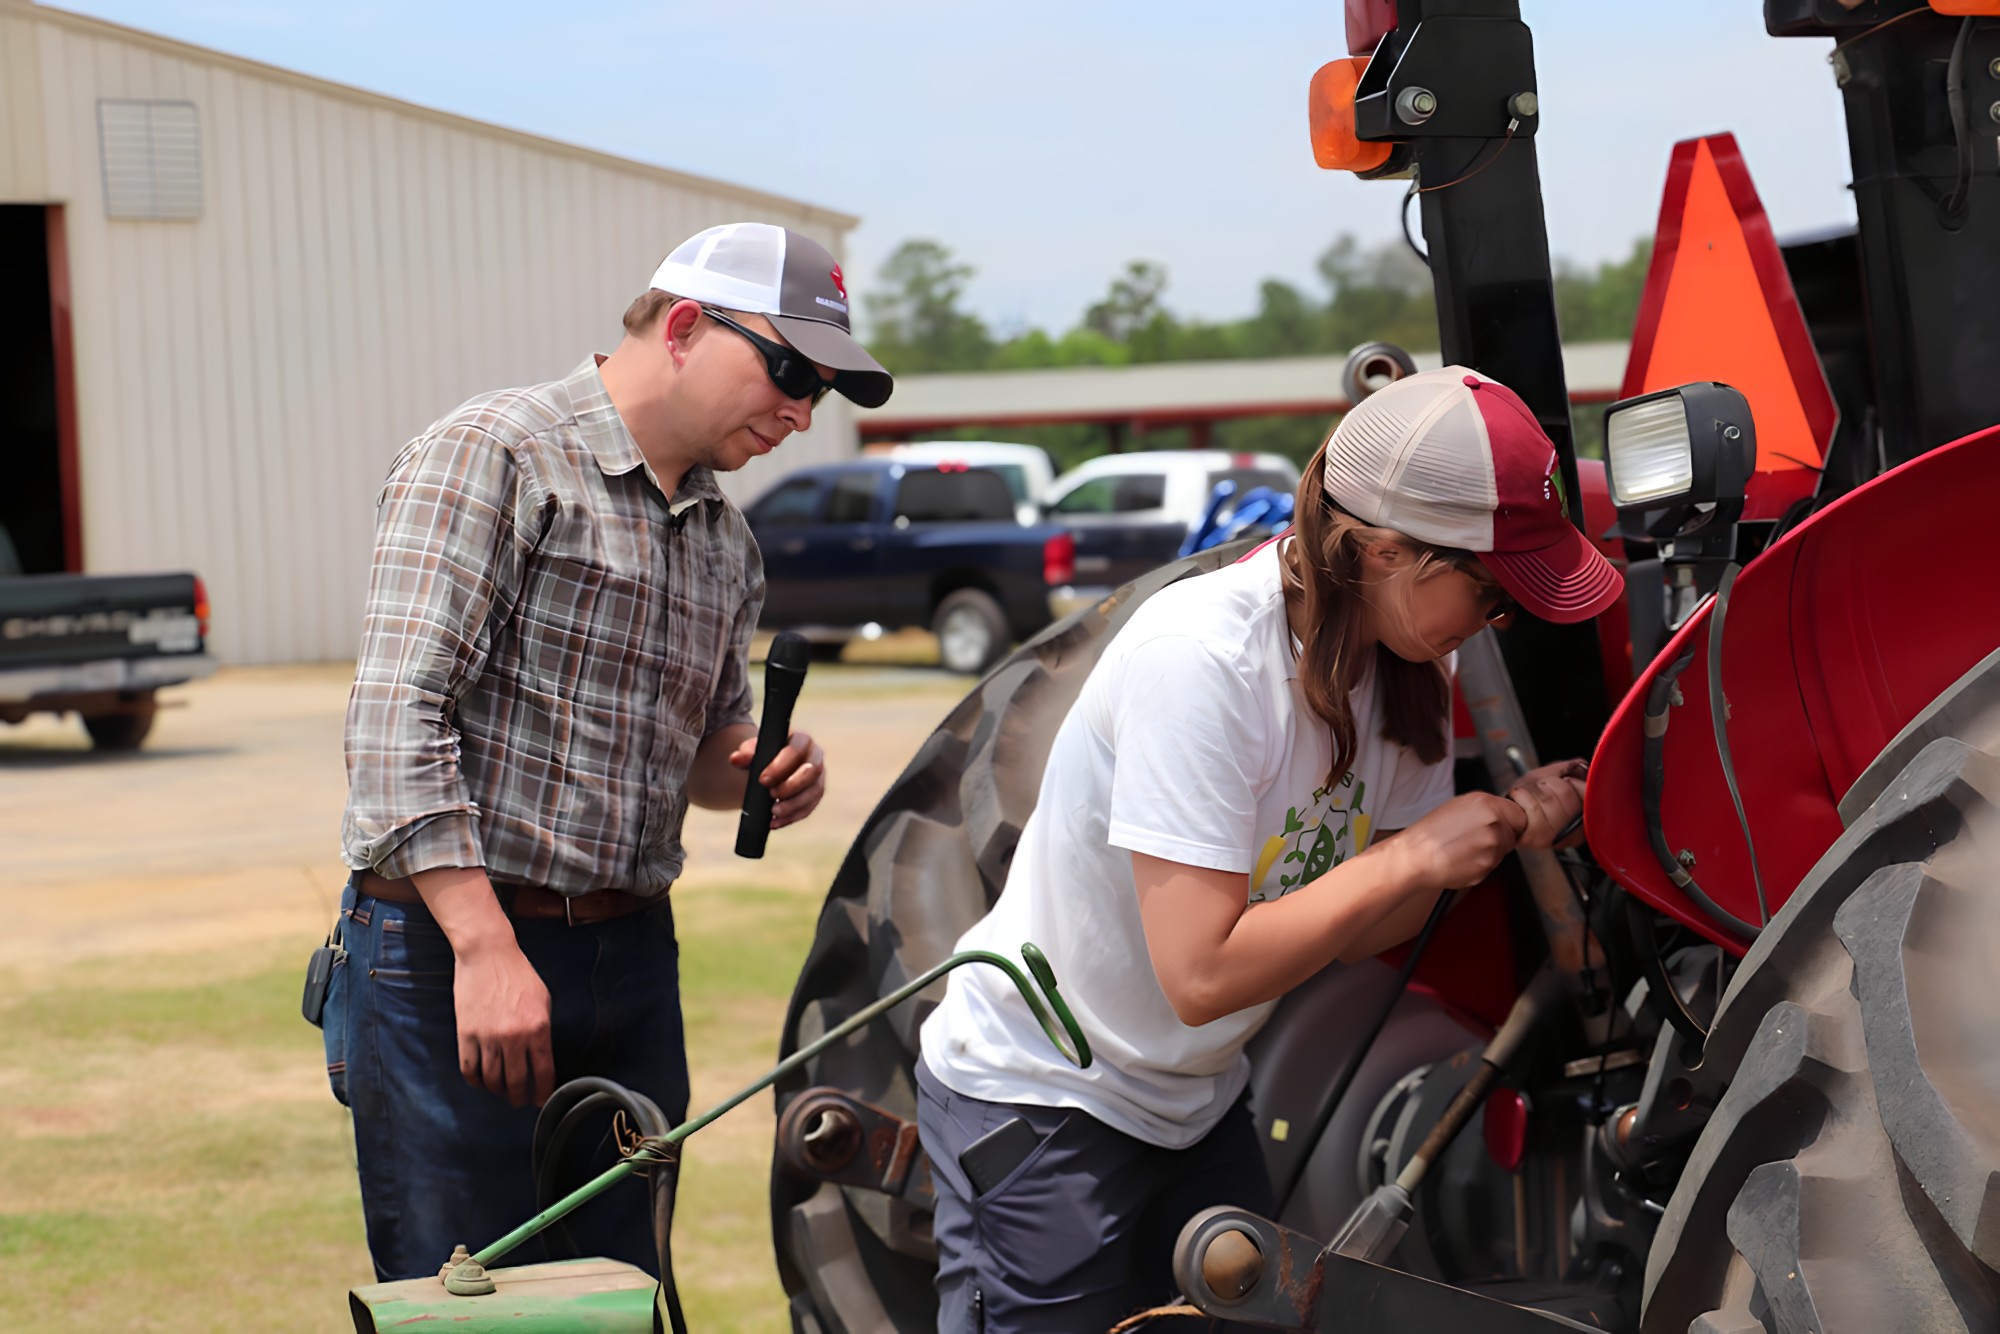 Two people during hands-on tractor safety training workshop